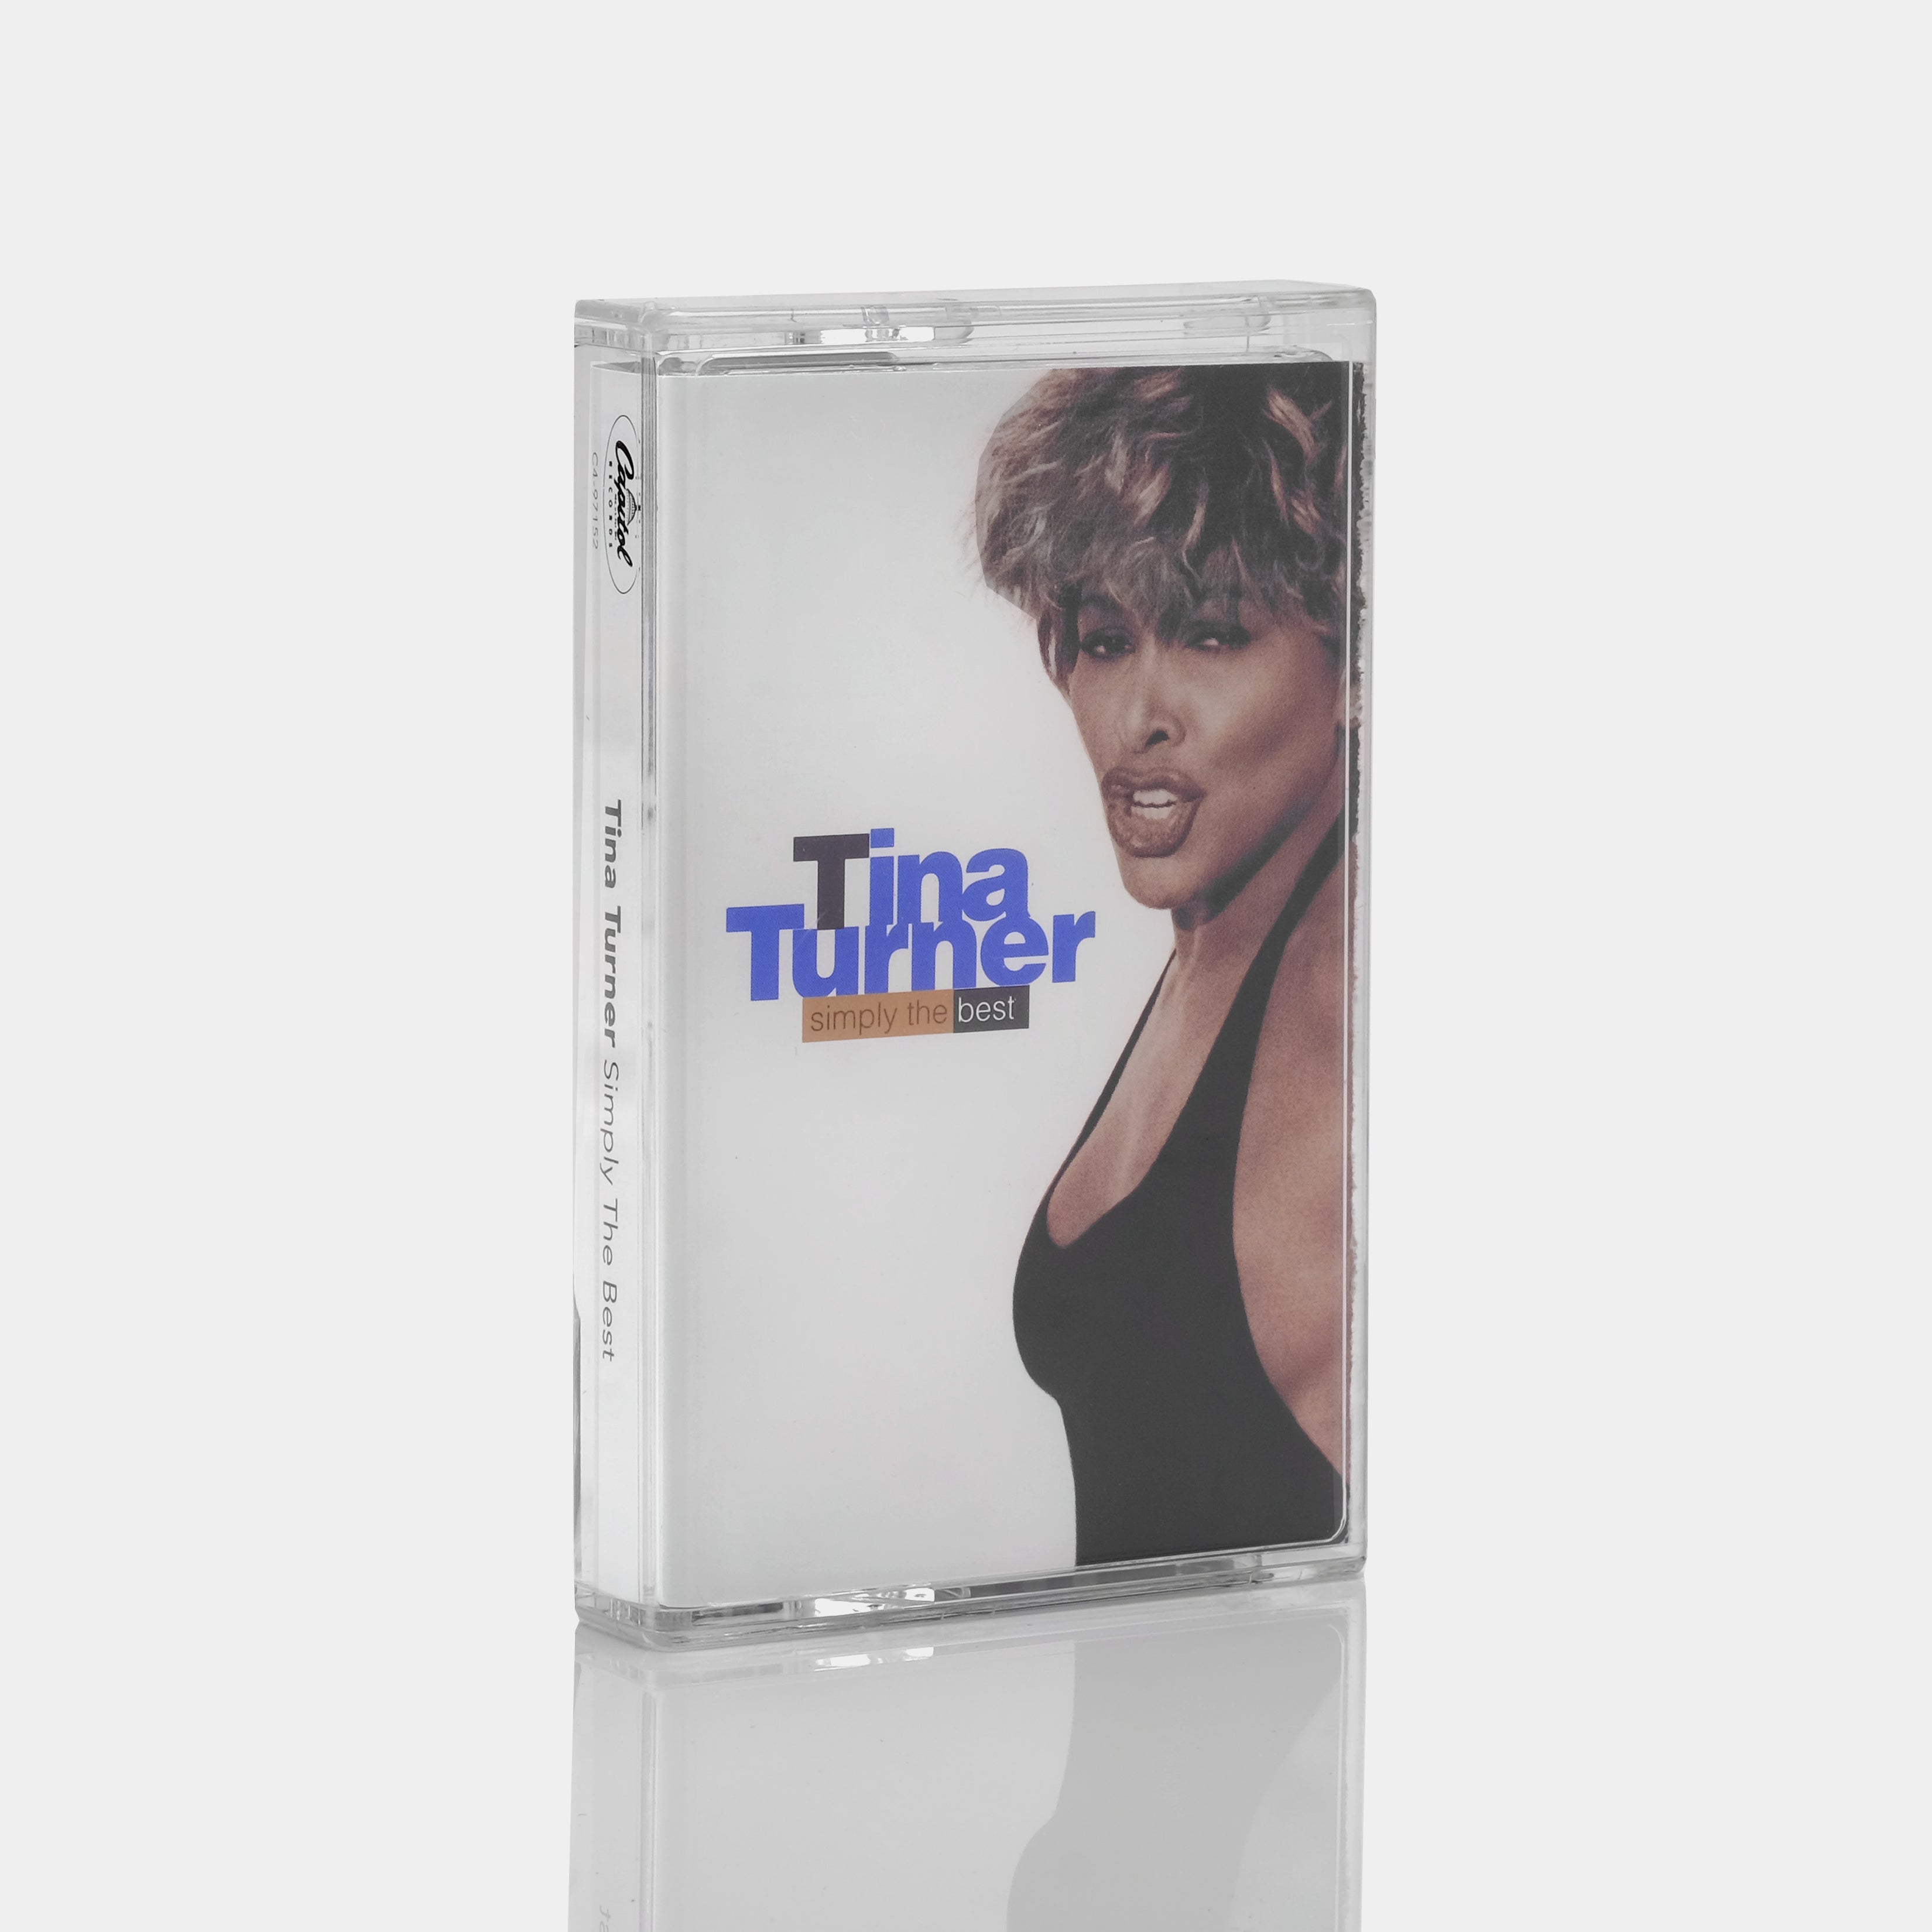 Tina Turner - Simply The Best Cassette Tape